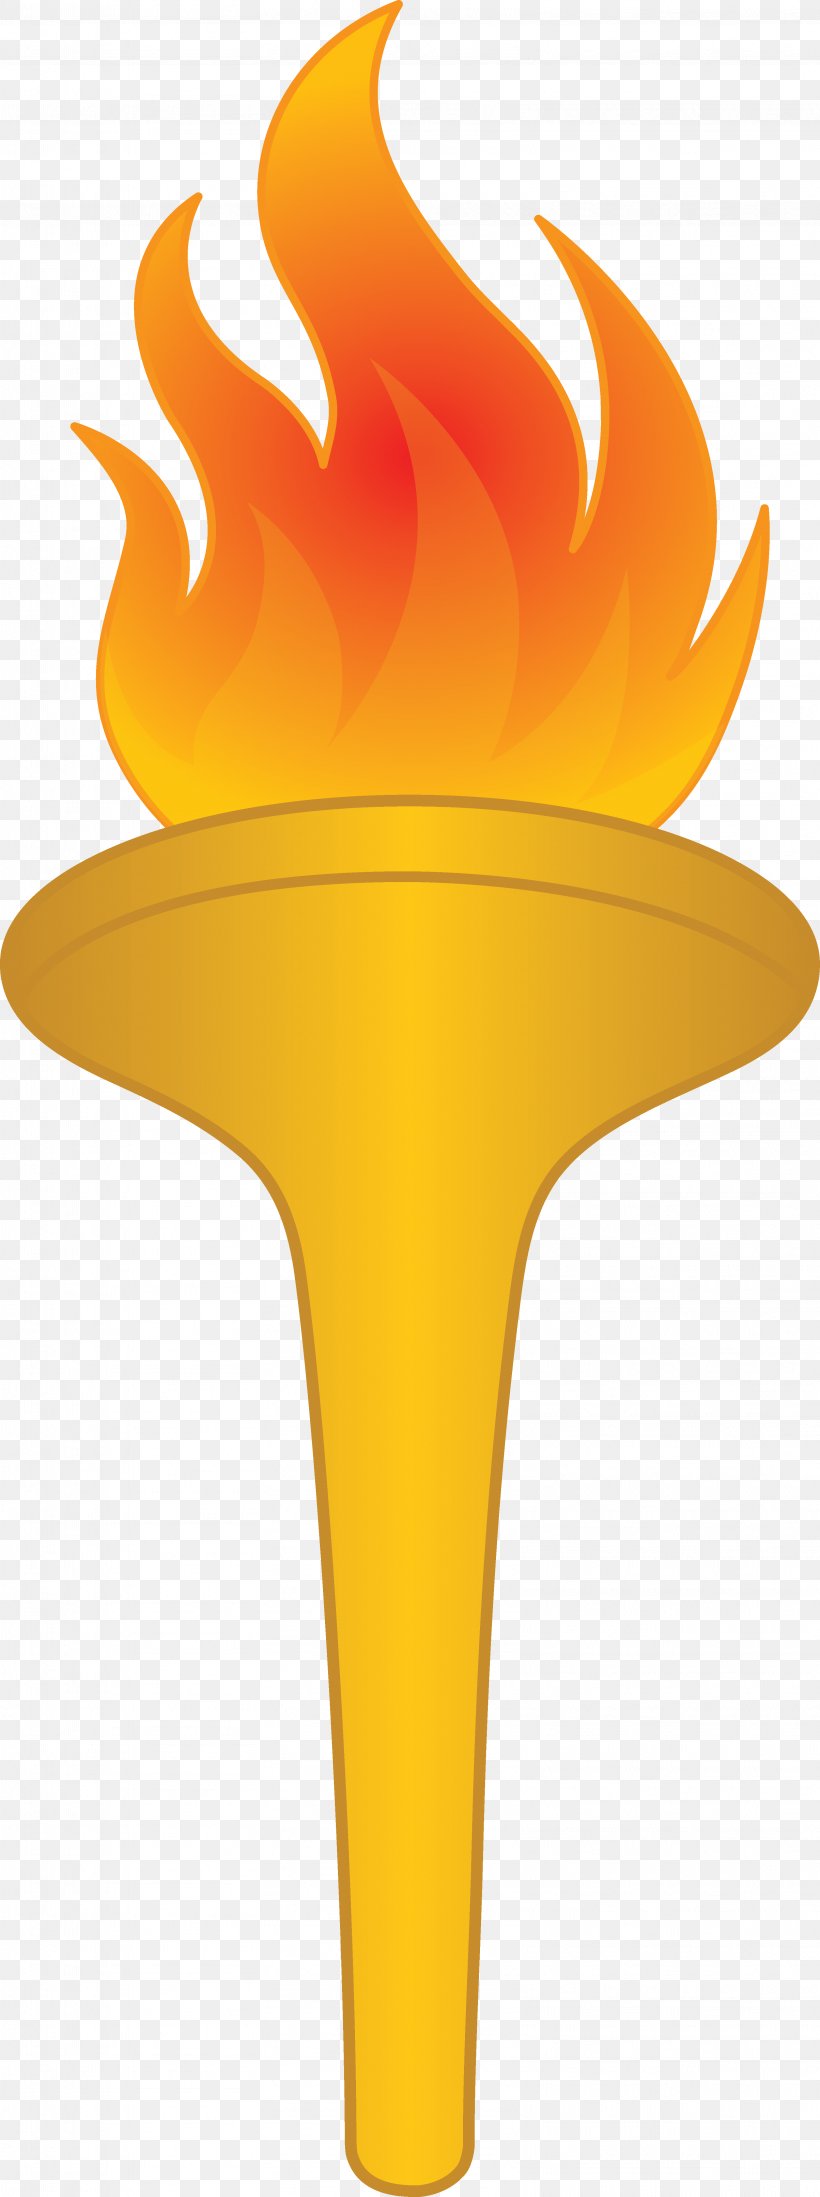 Winter Olympic Games Olympic Flame Torch Clip Art, PNG, 3227x8648px, Winter Olympic Games, Fire, Flower, Food, Olympic Flame Download Free